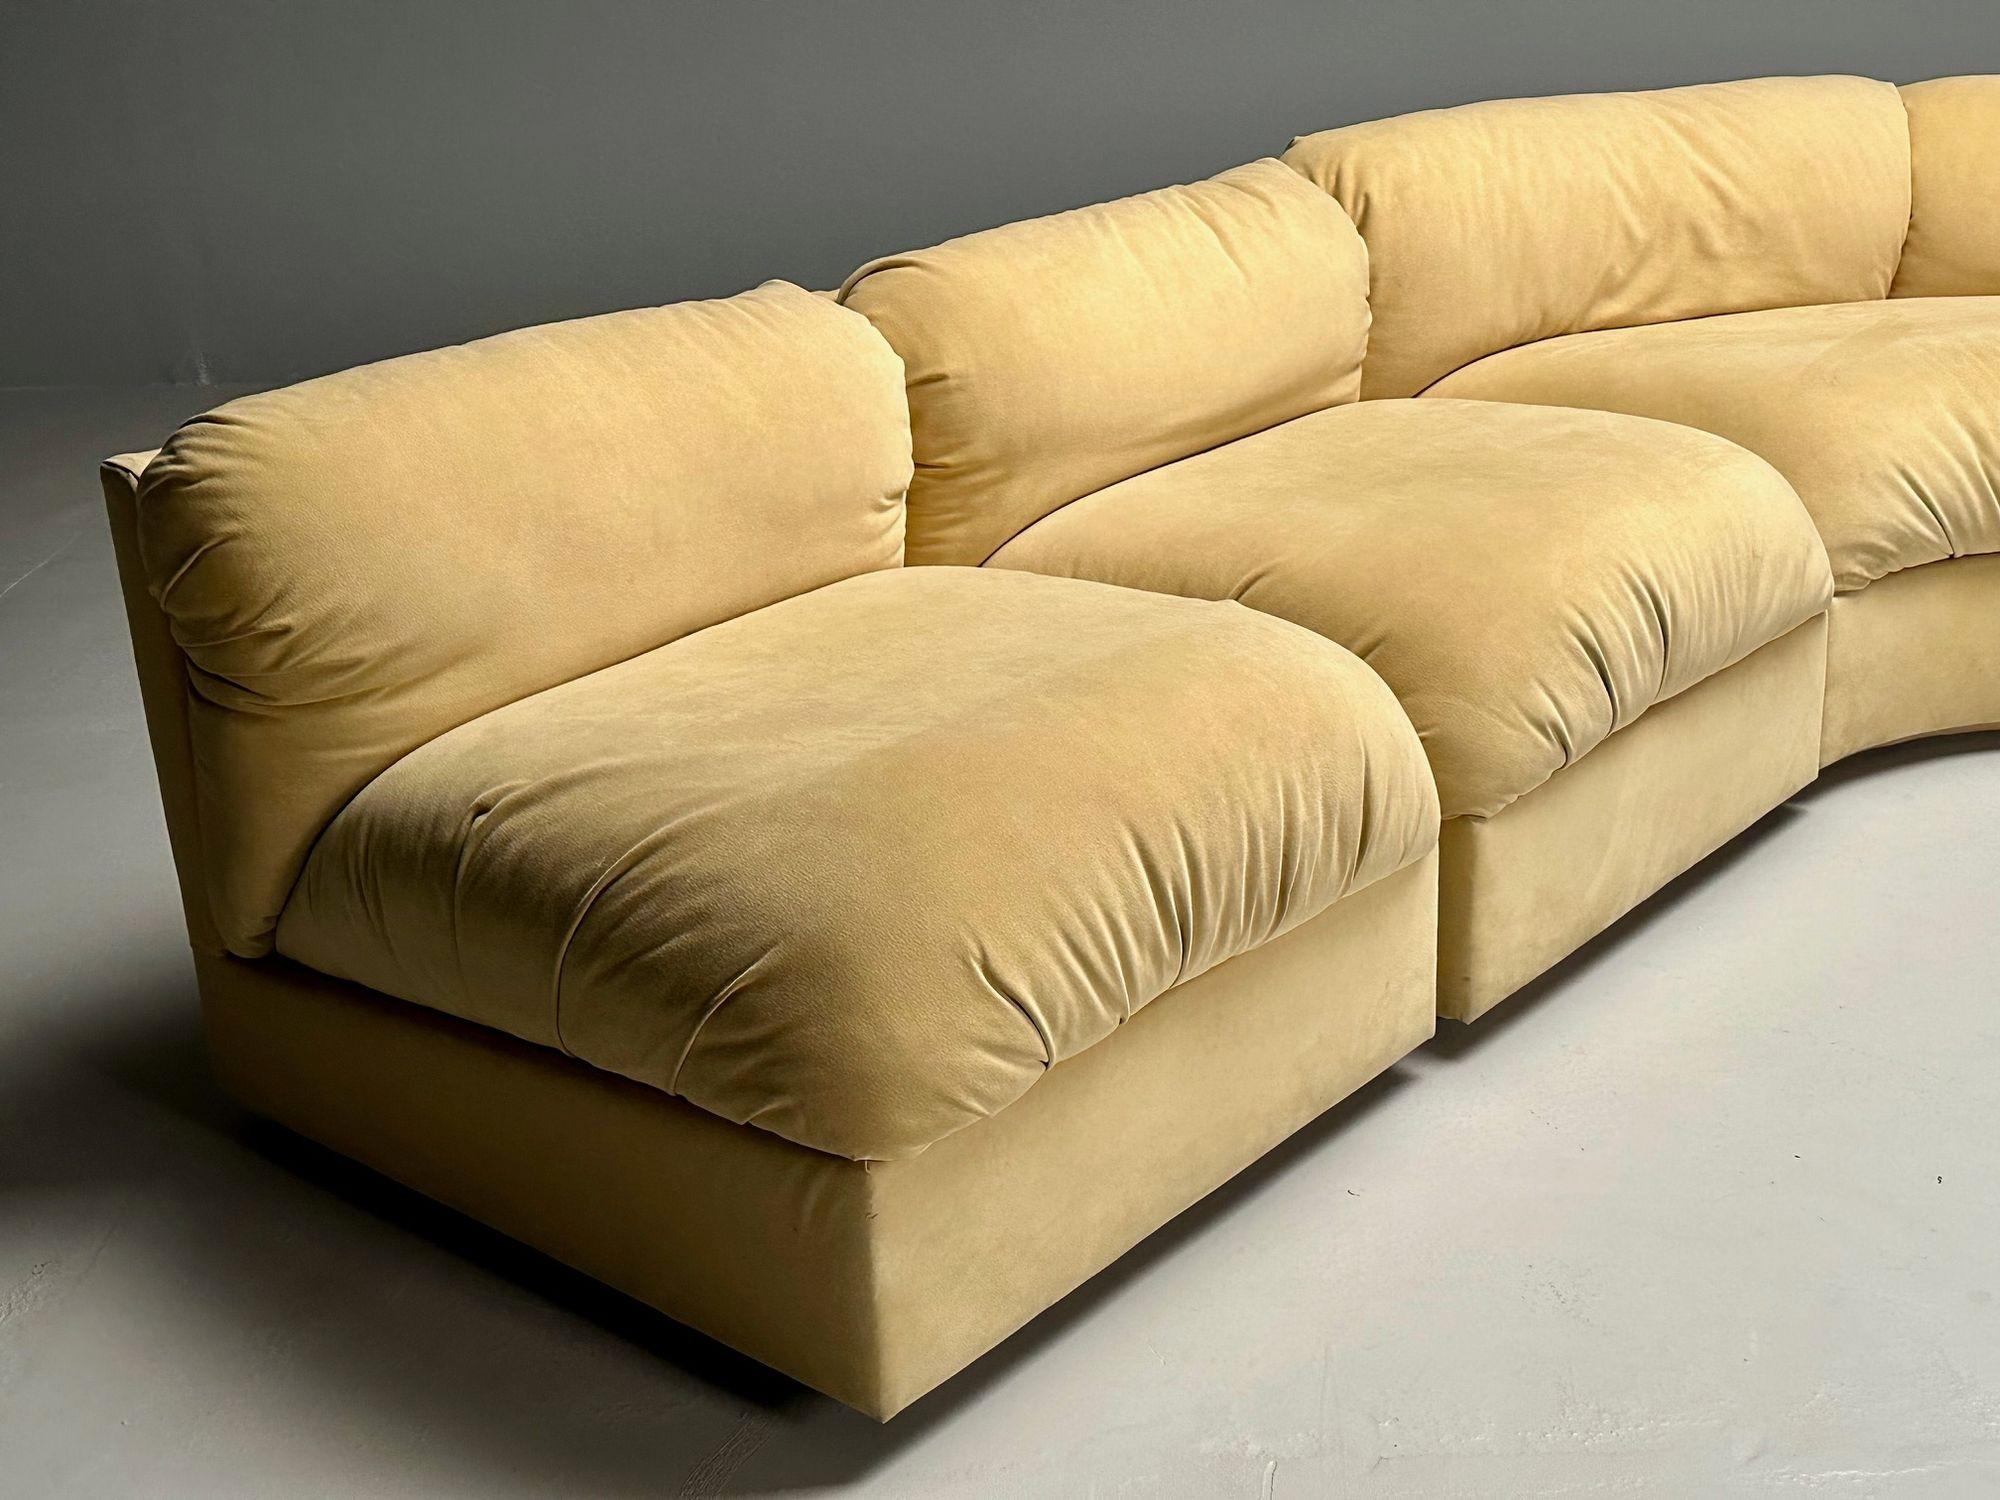 Fabric Erwin-Lambeth, Mid-Century Modern, Large Modular Sectional Sofa, Re-upholstery For Sale